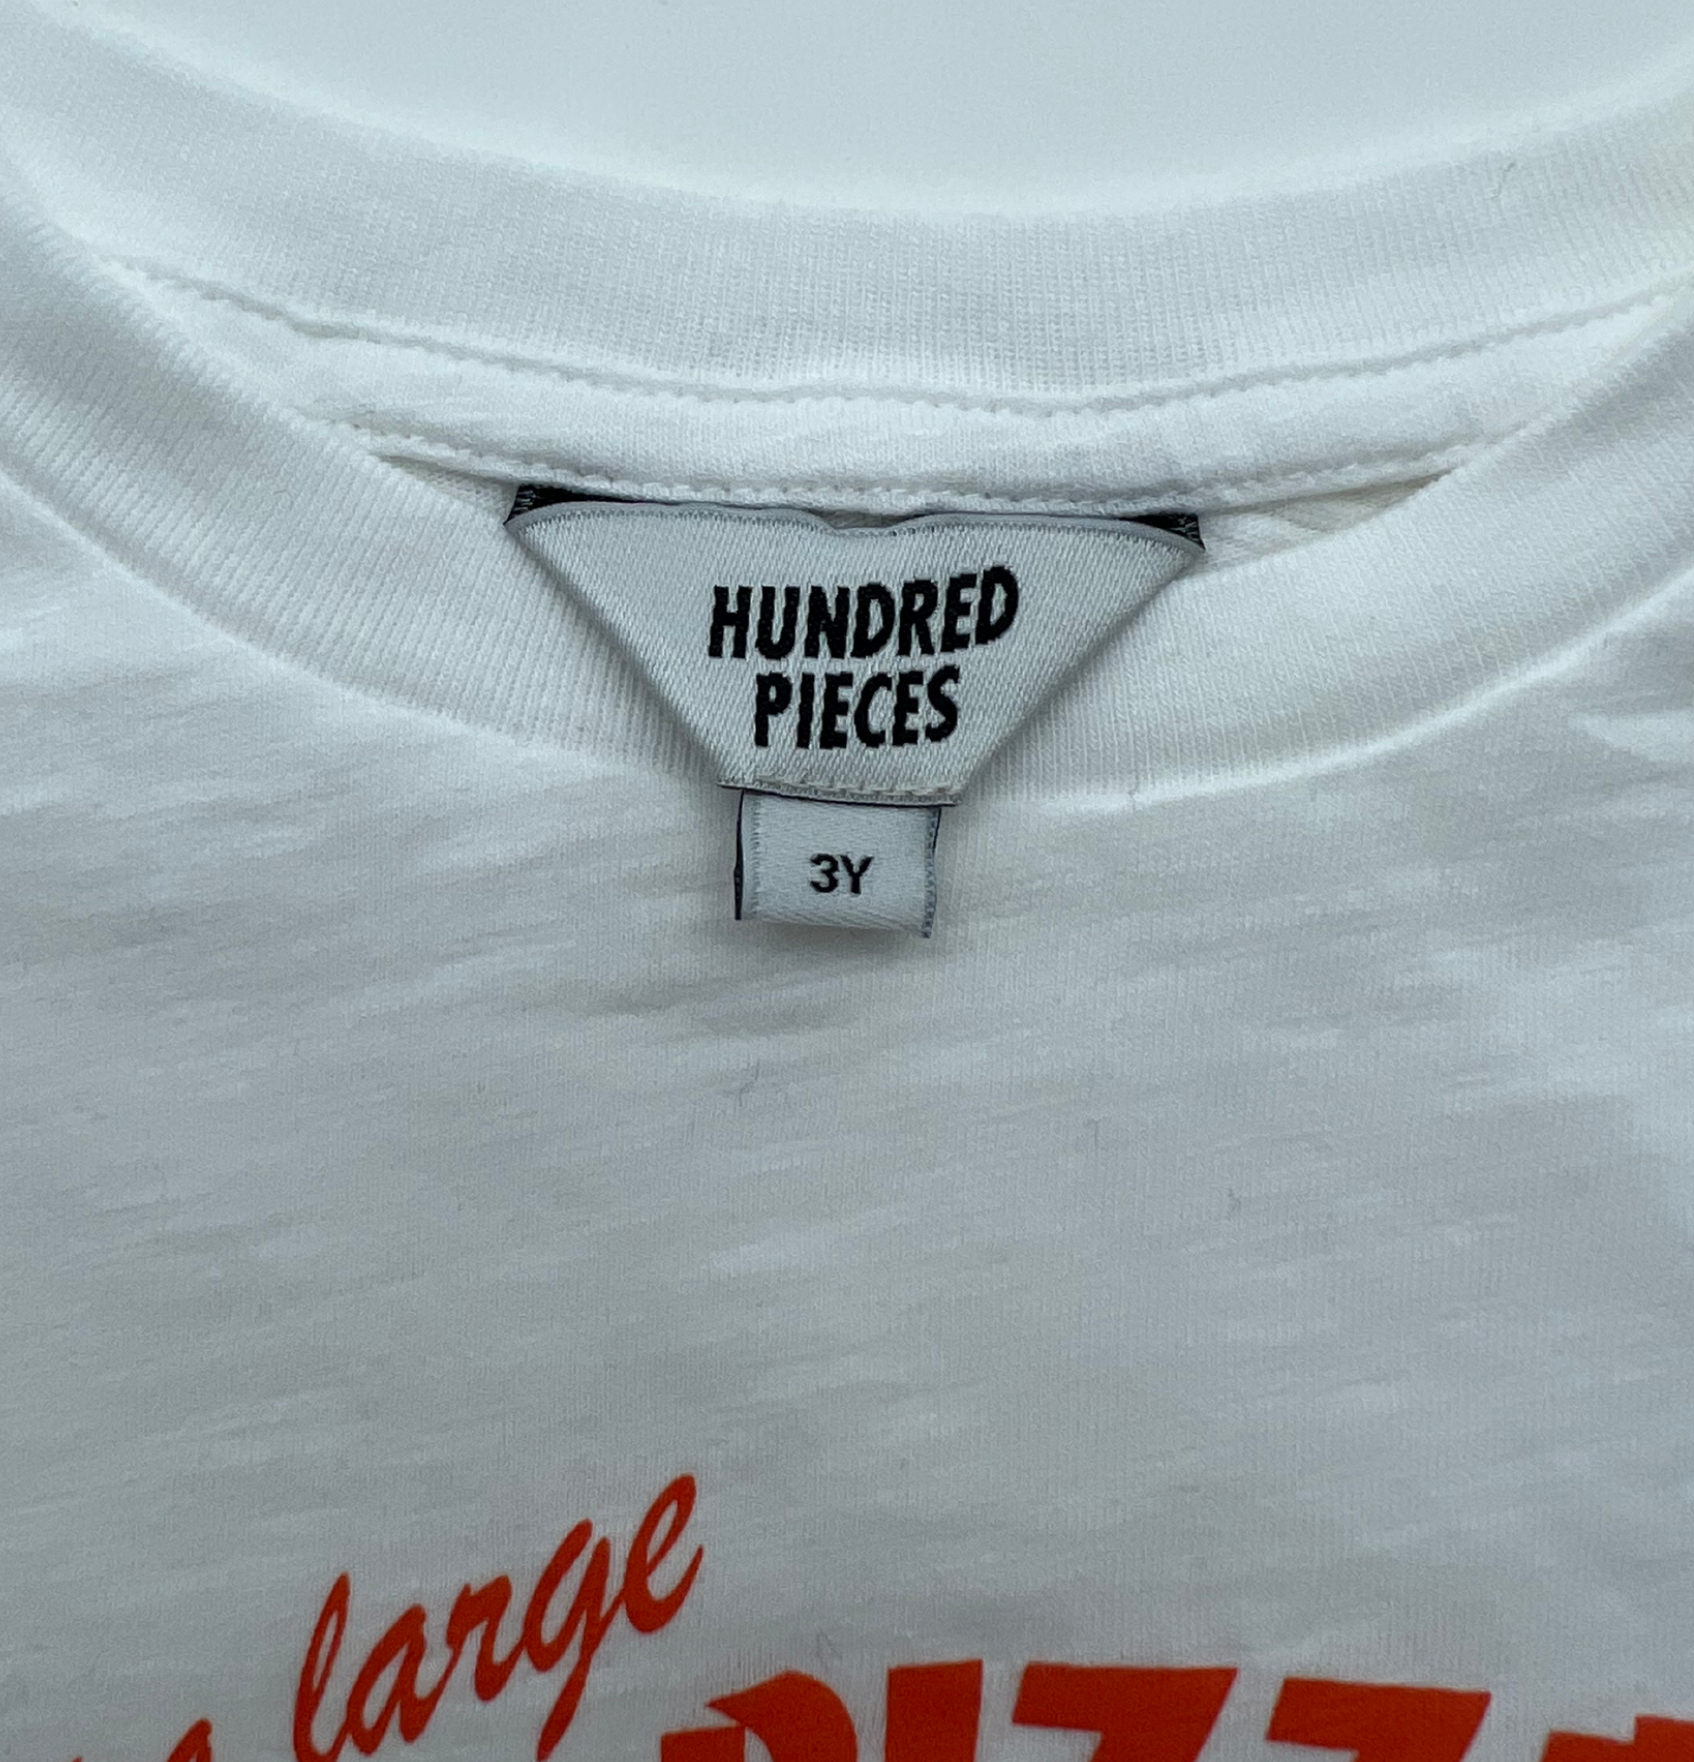 HUNDRED PIECES - T-shirt - 3 years